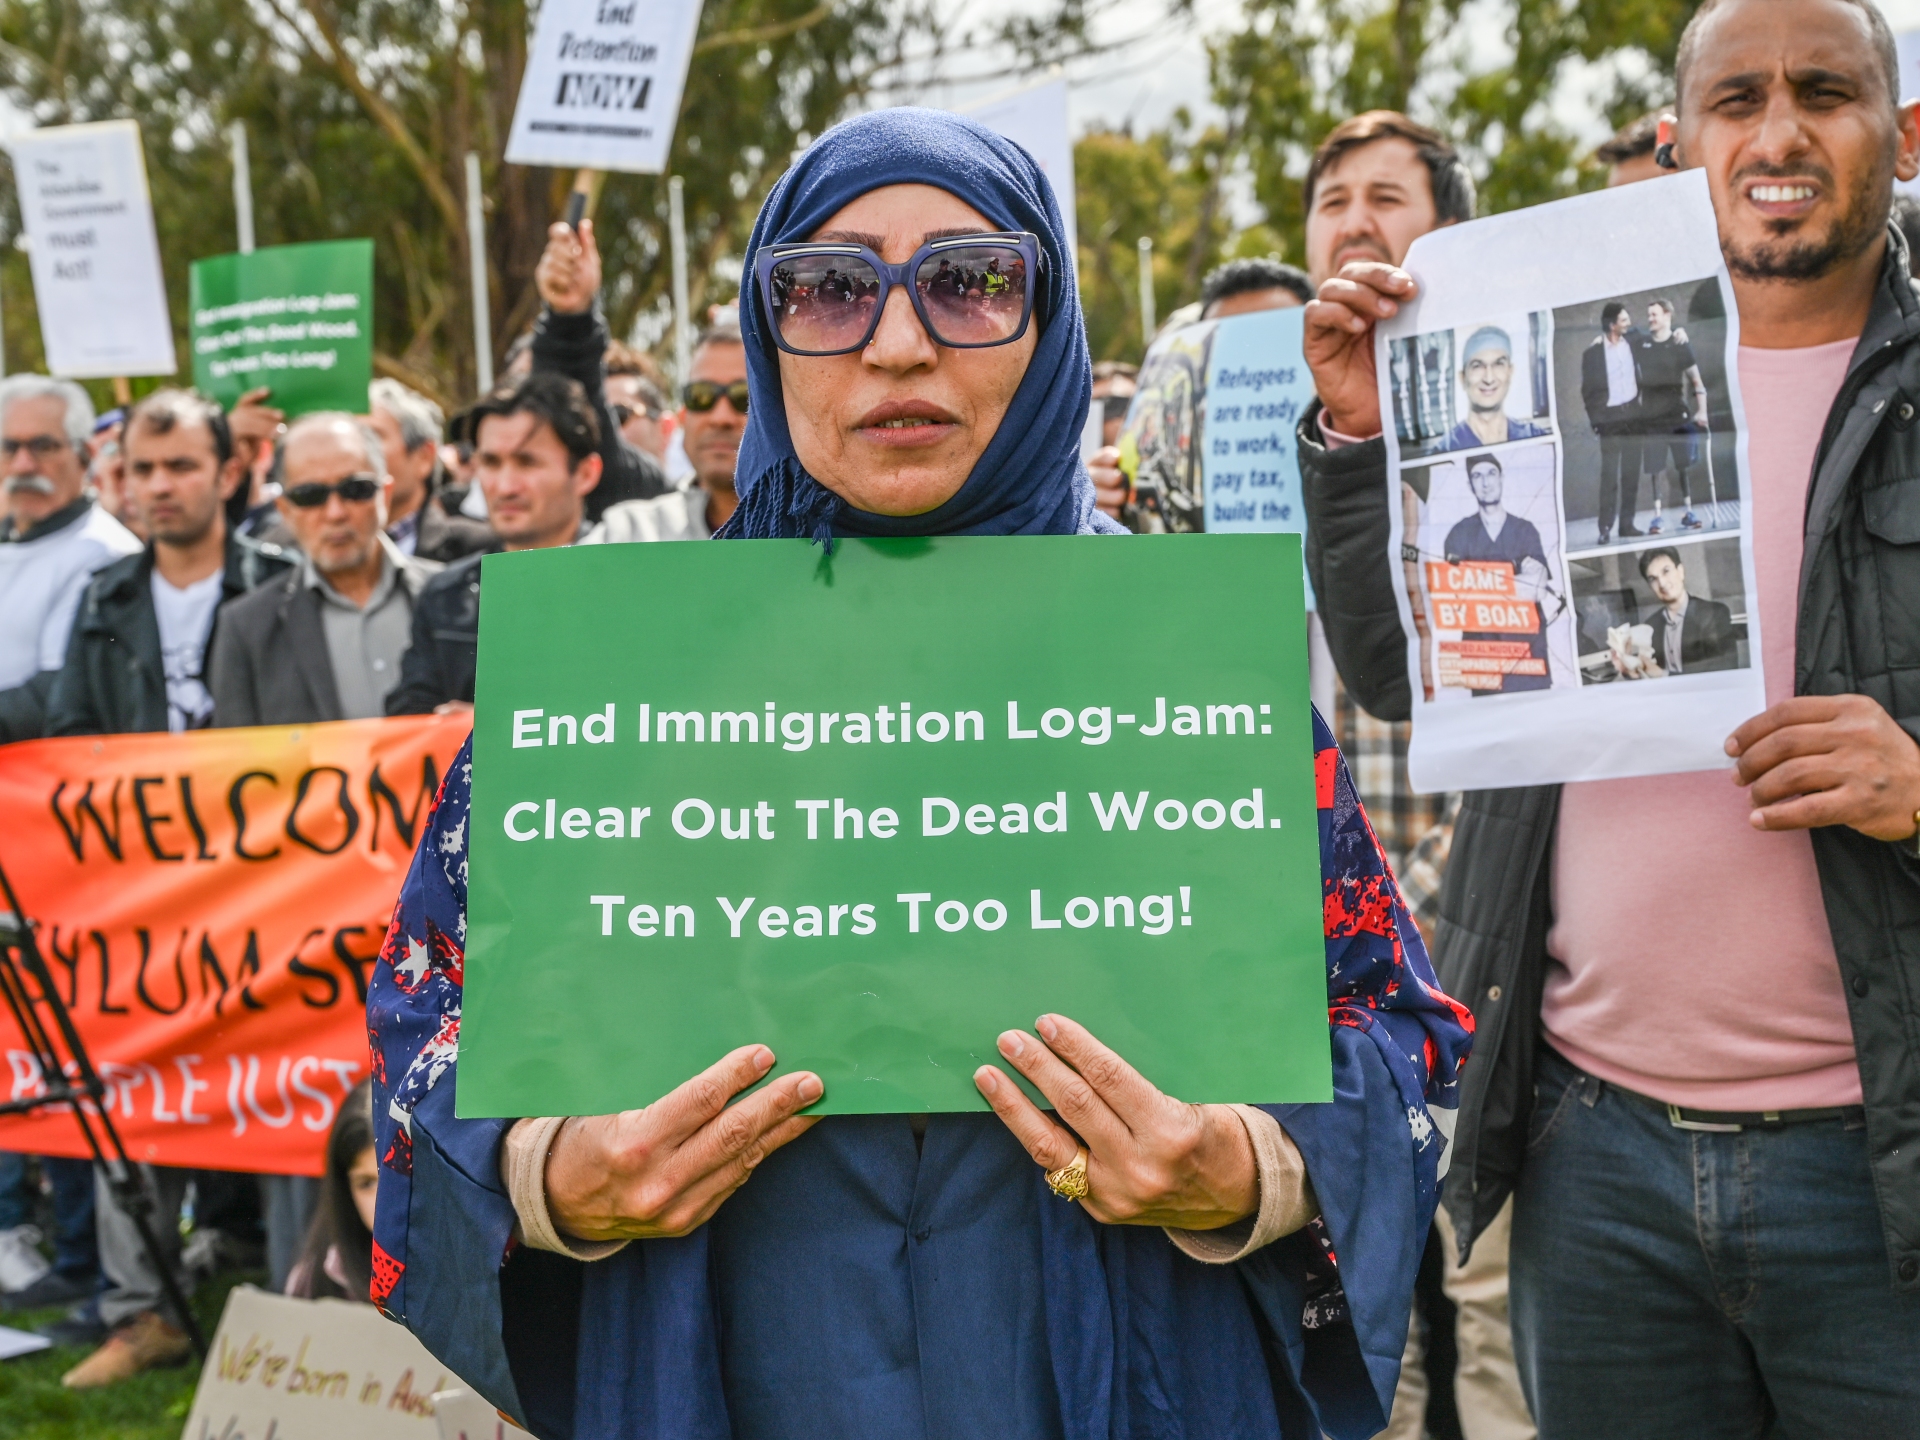 ‘Too much’: Refugees rally for permanent visas in Australia